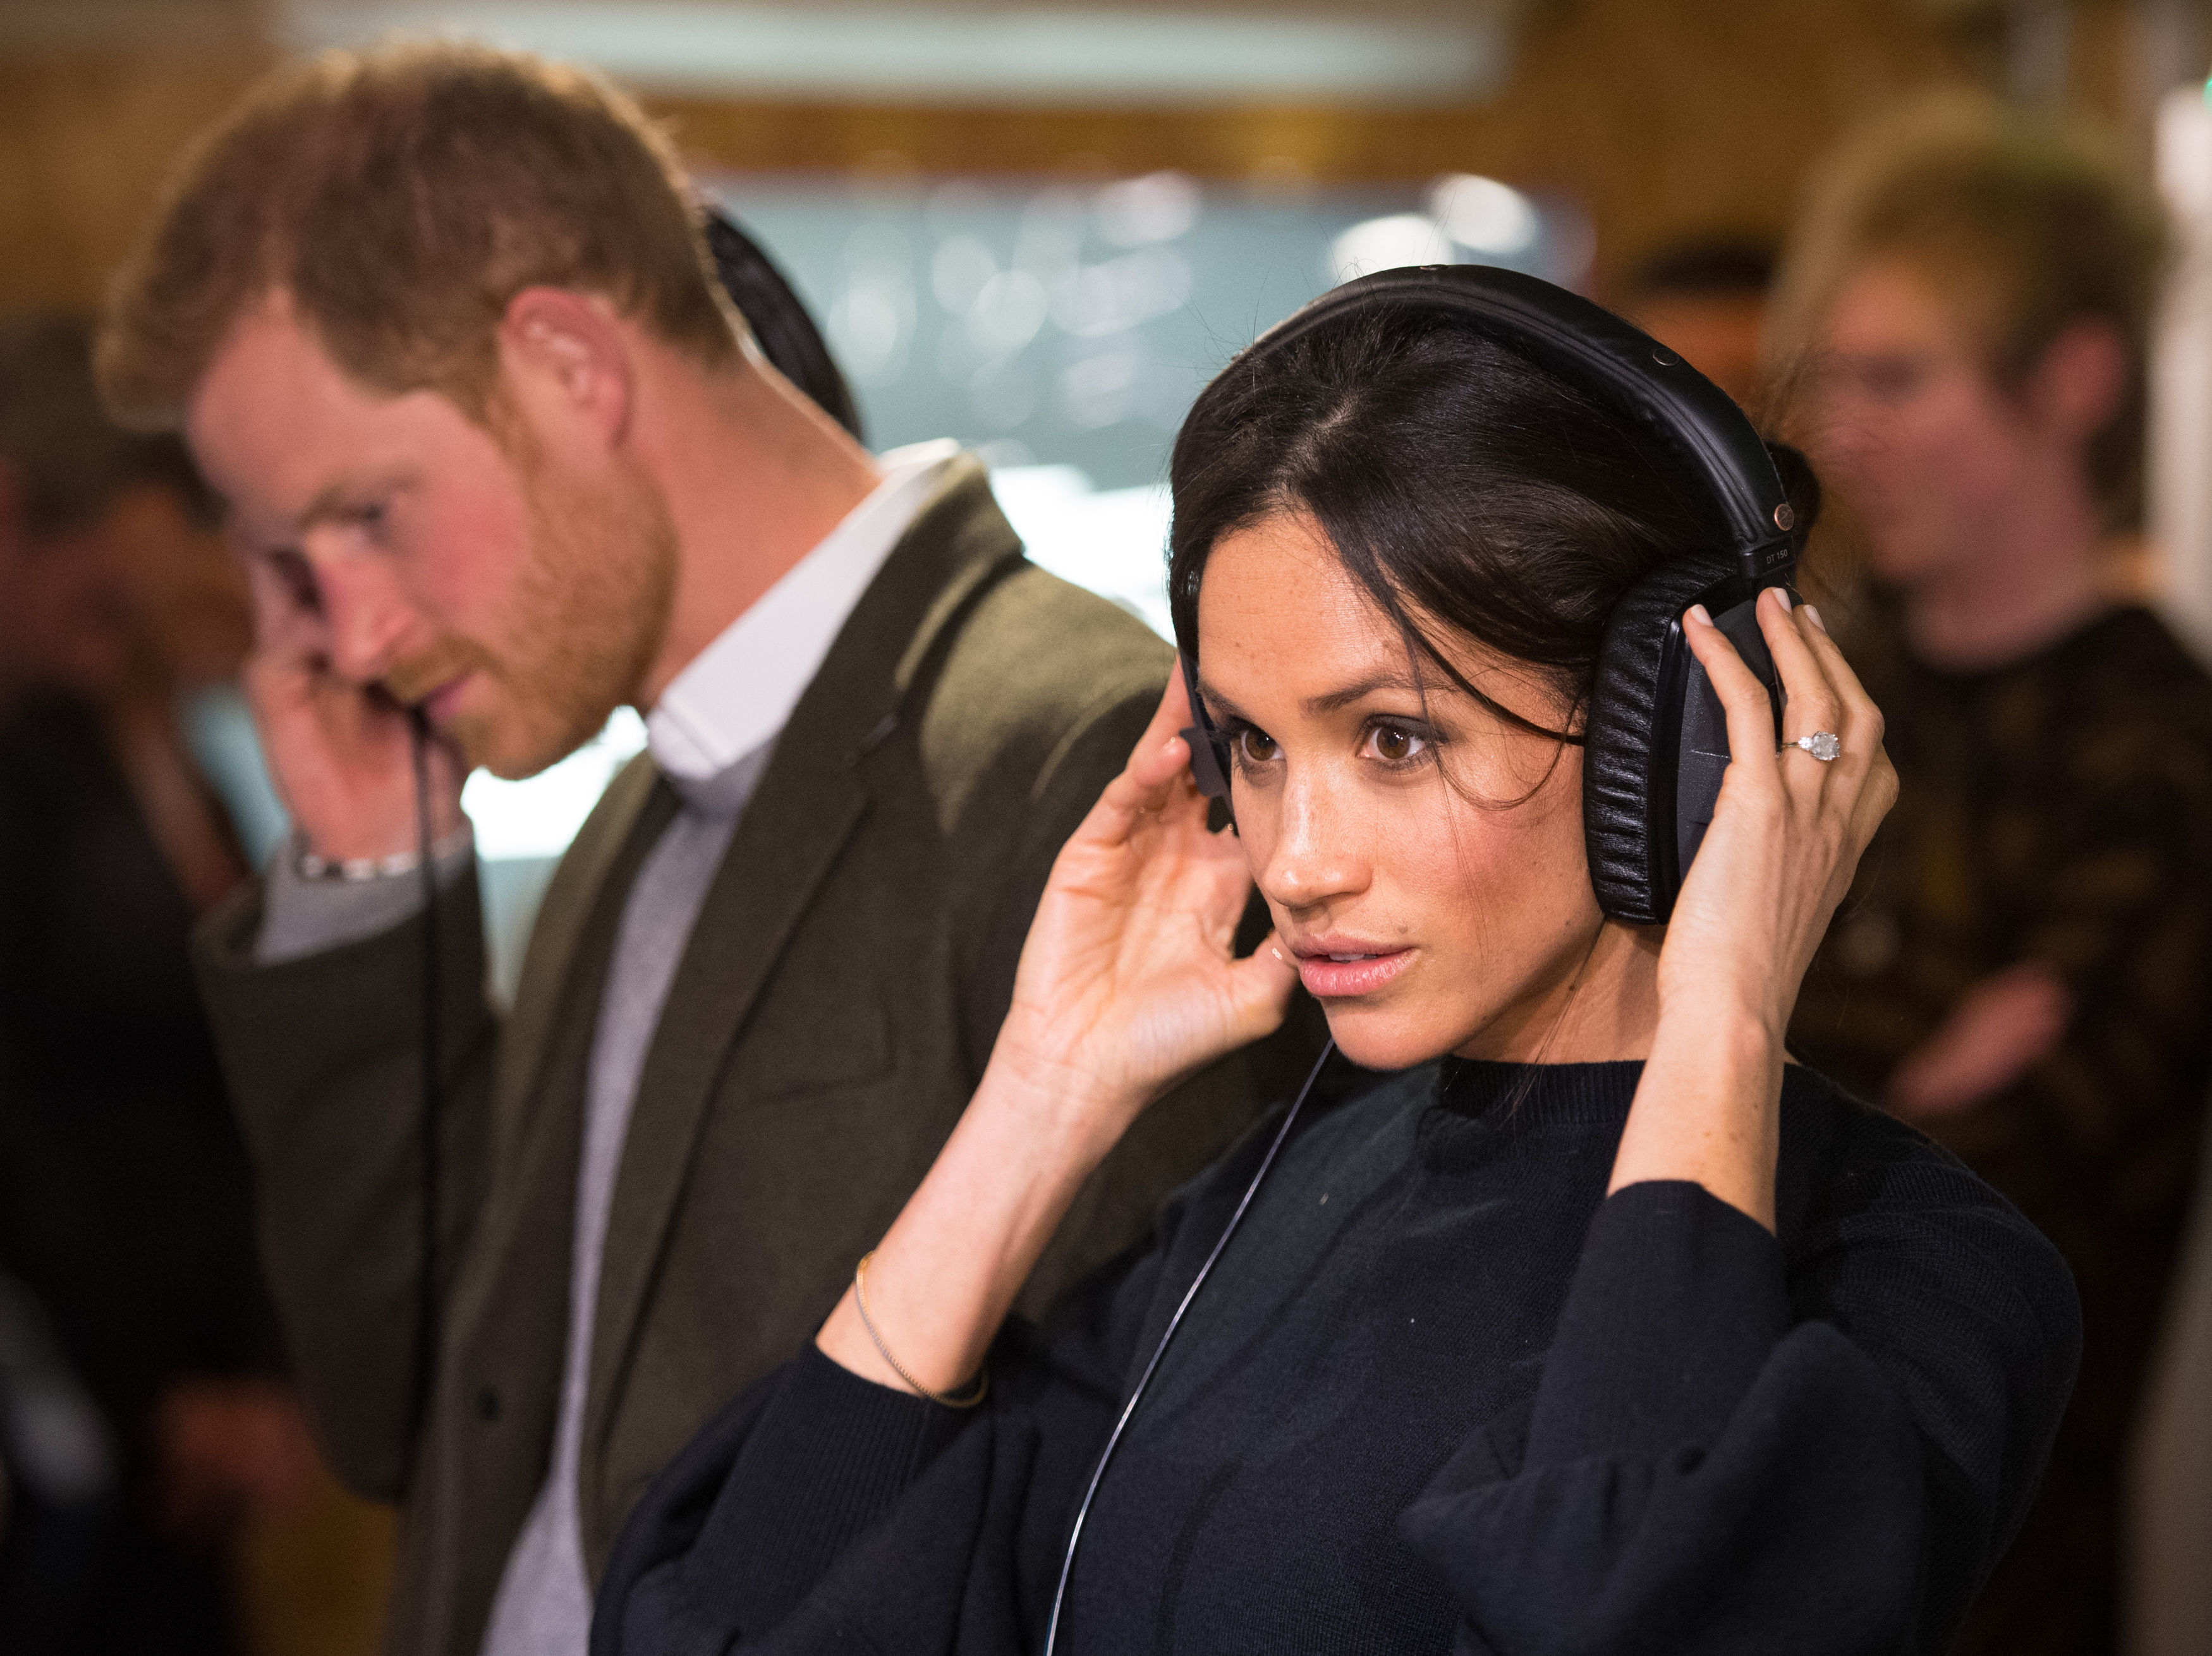 Prince Harry and Meghan Markle listen to a broadcast through headphones at Reprezent 107.3FM in Pop Brixton on January 9, 2018 in London, England. | Source: Getty Images